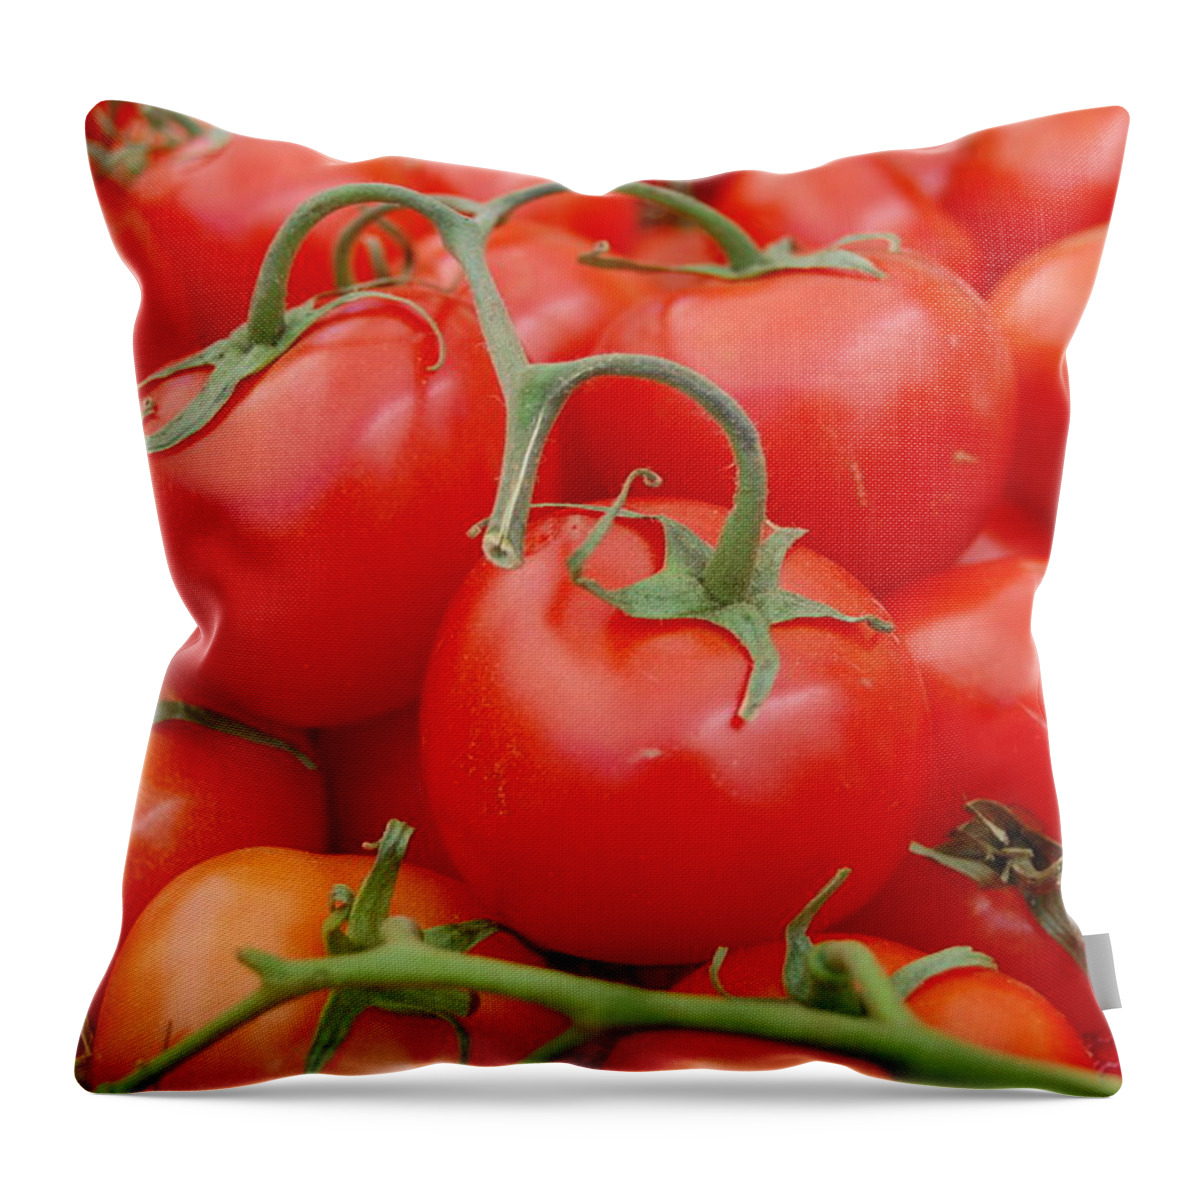 Vegetables Throw Pillow featuring the photograph Tomatoes by Amy Fose